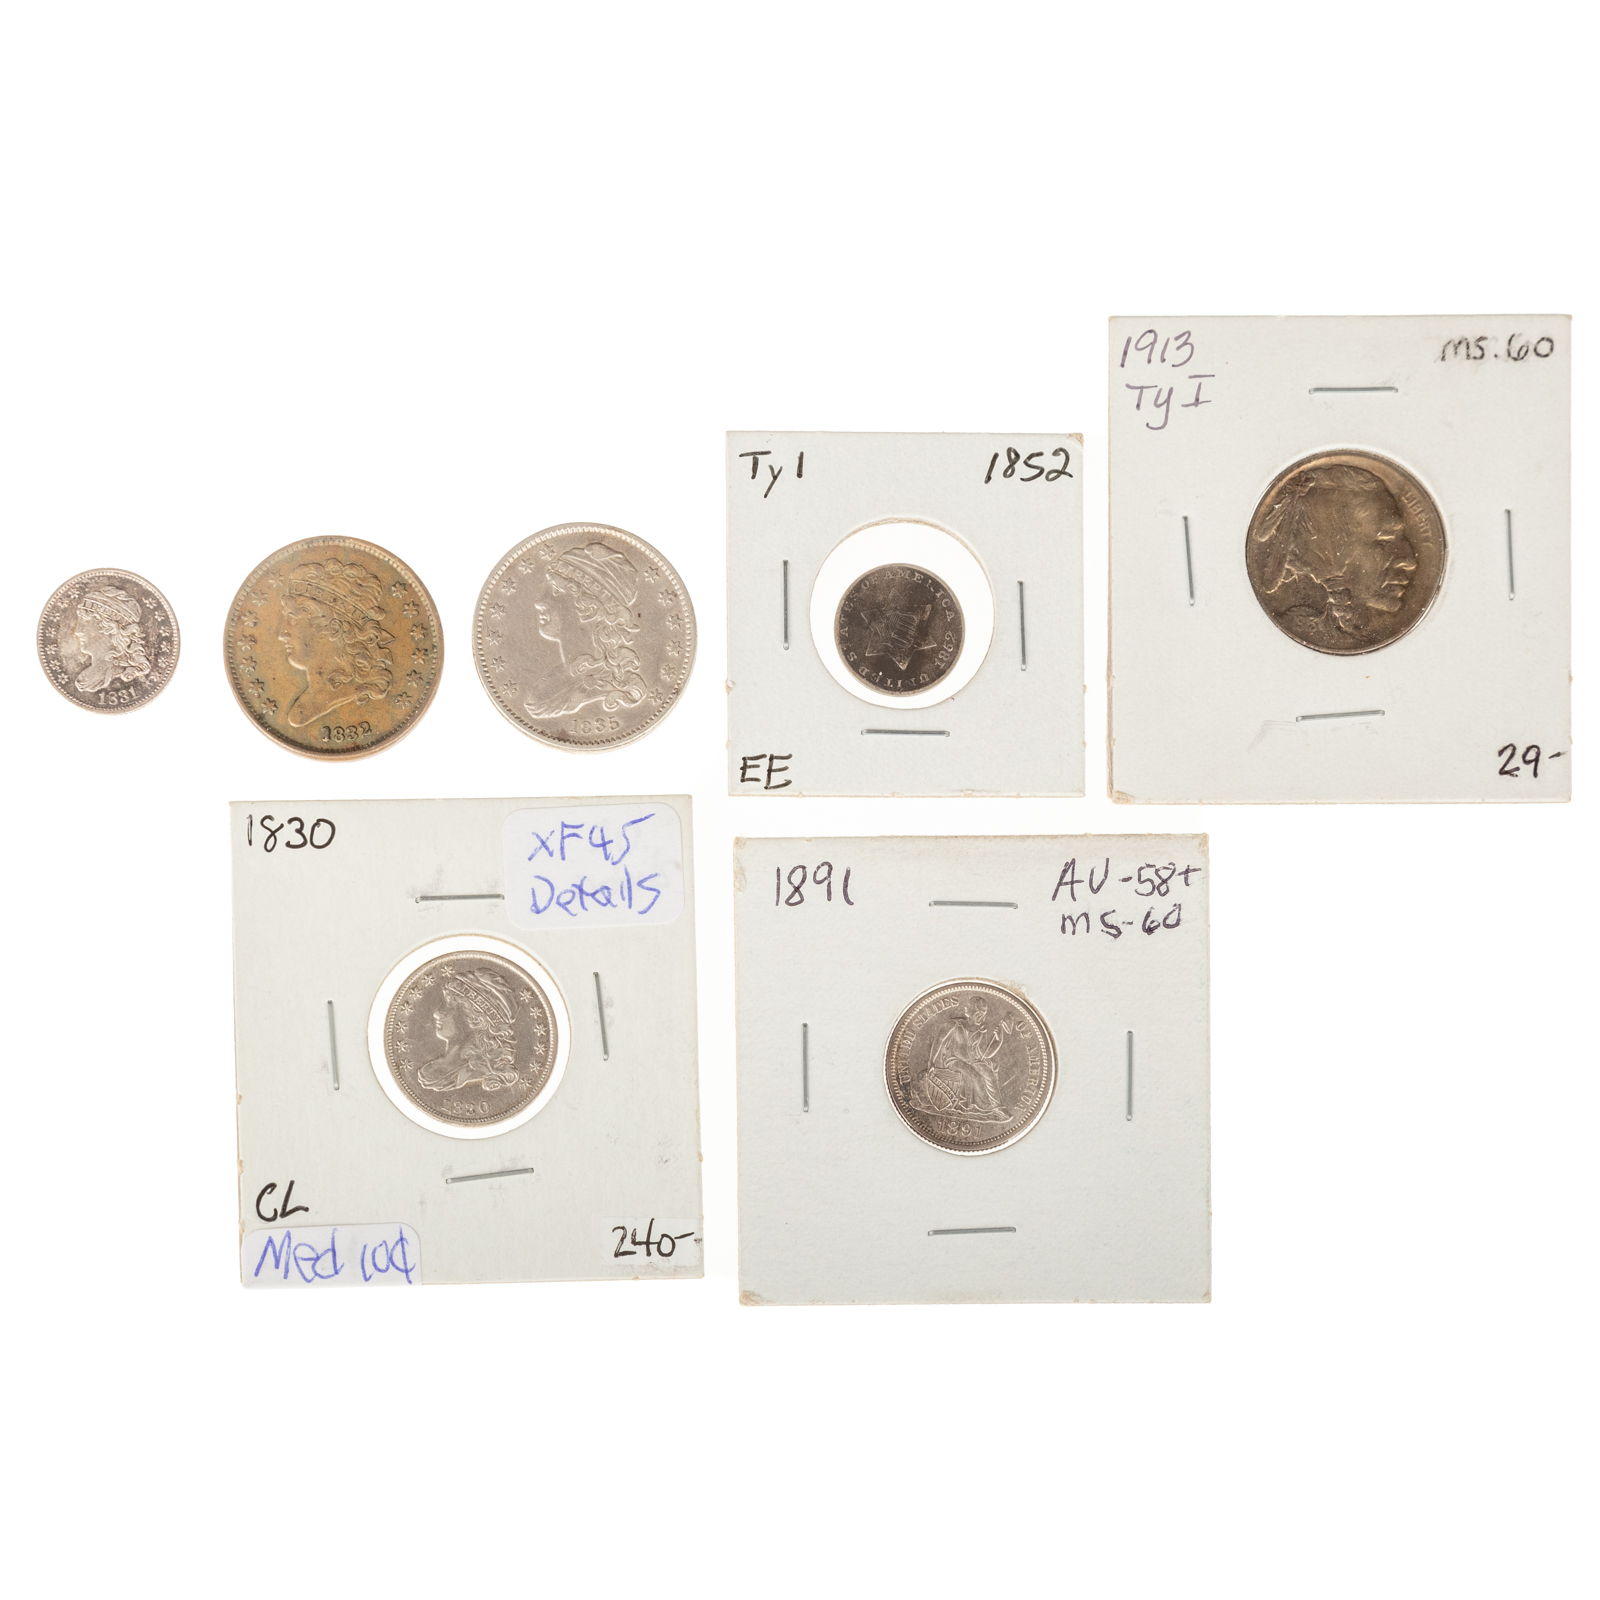 SIX NICE TYPE COINS WITH AU BUST 3b2829